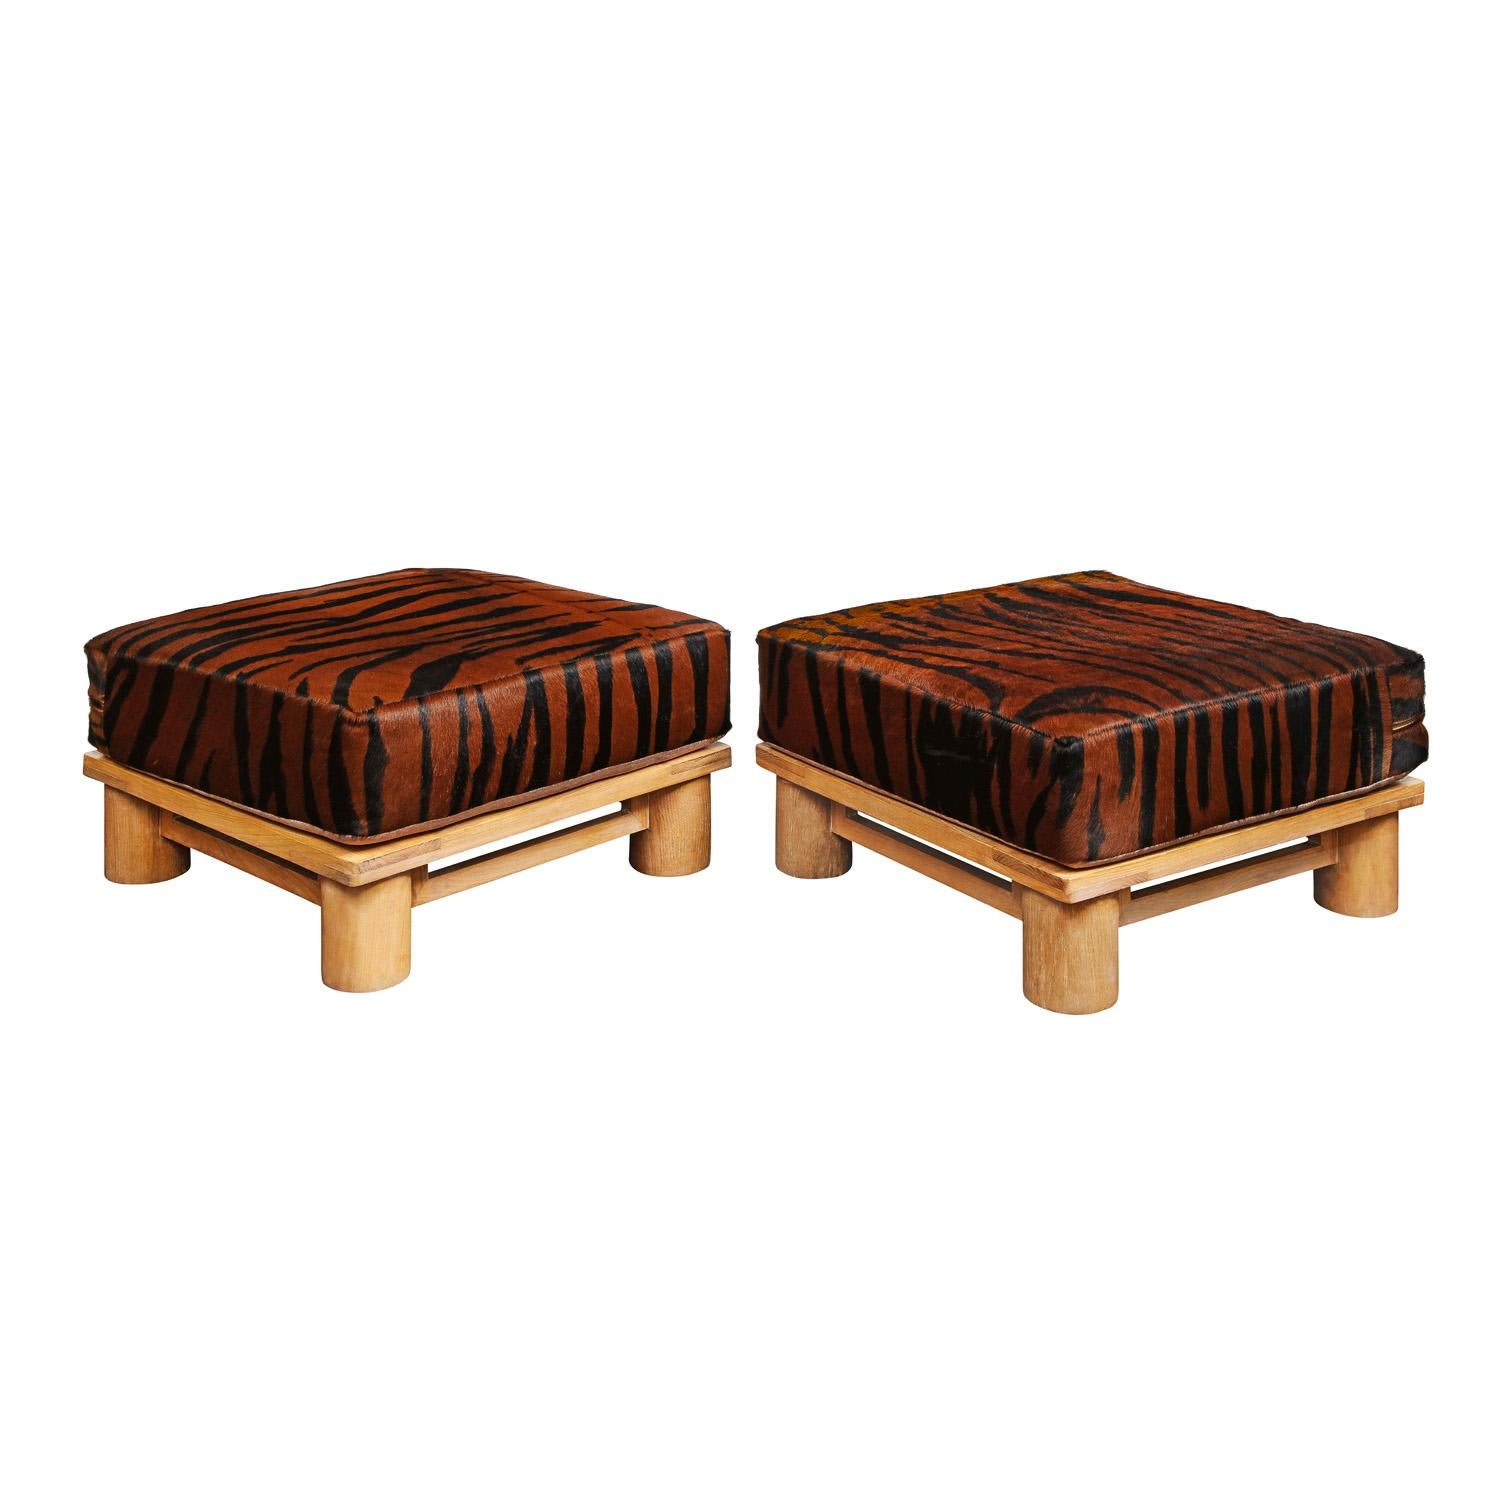 Pair of “Dowelwood Ottomans” with cushions upholstered in brown zebra printed pony skin by Karl Springer, American 1980's. These ottomans, like all of Springer’s pieces, are beautifully crafted.

Reference:
Karl Springer LTD Red Binder Catalog